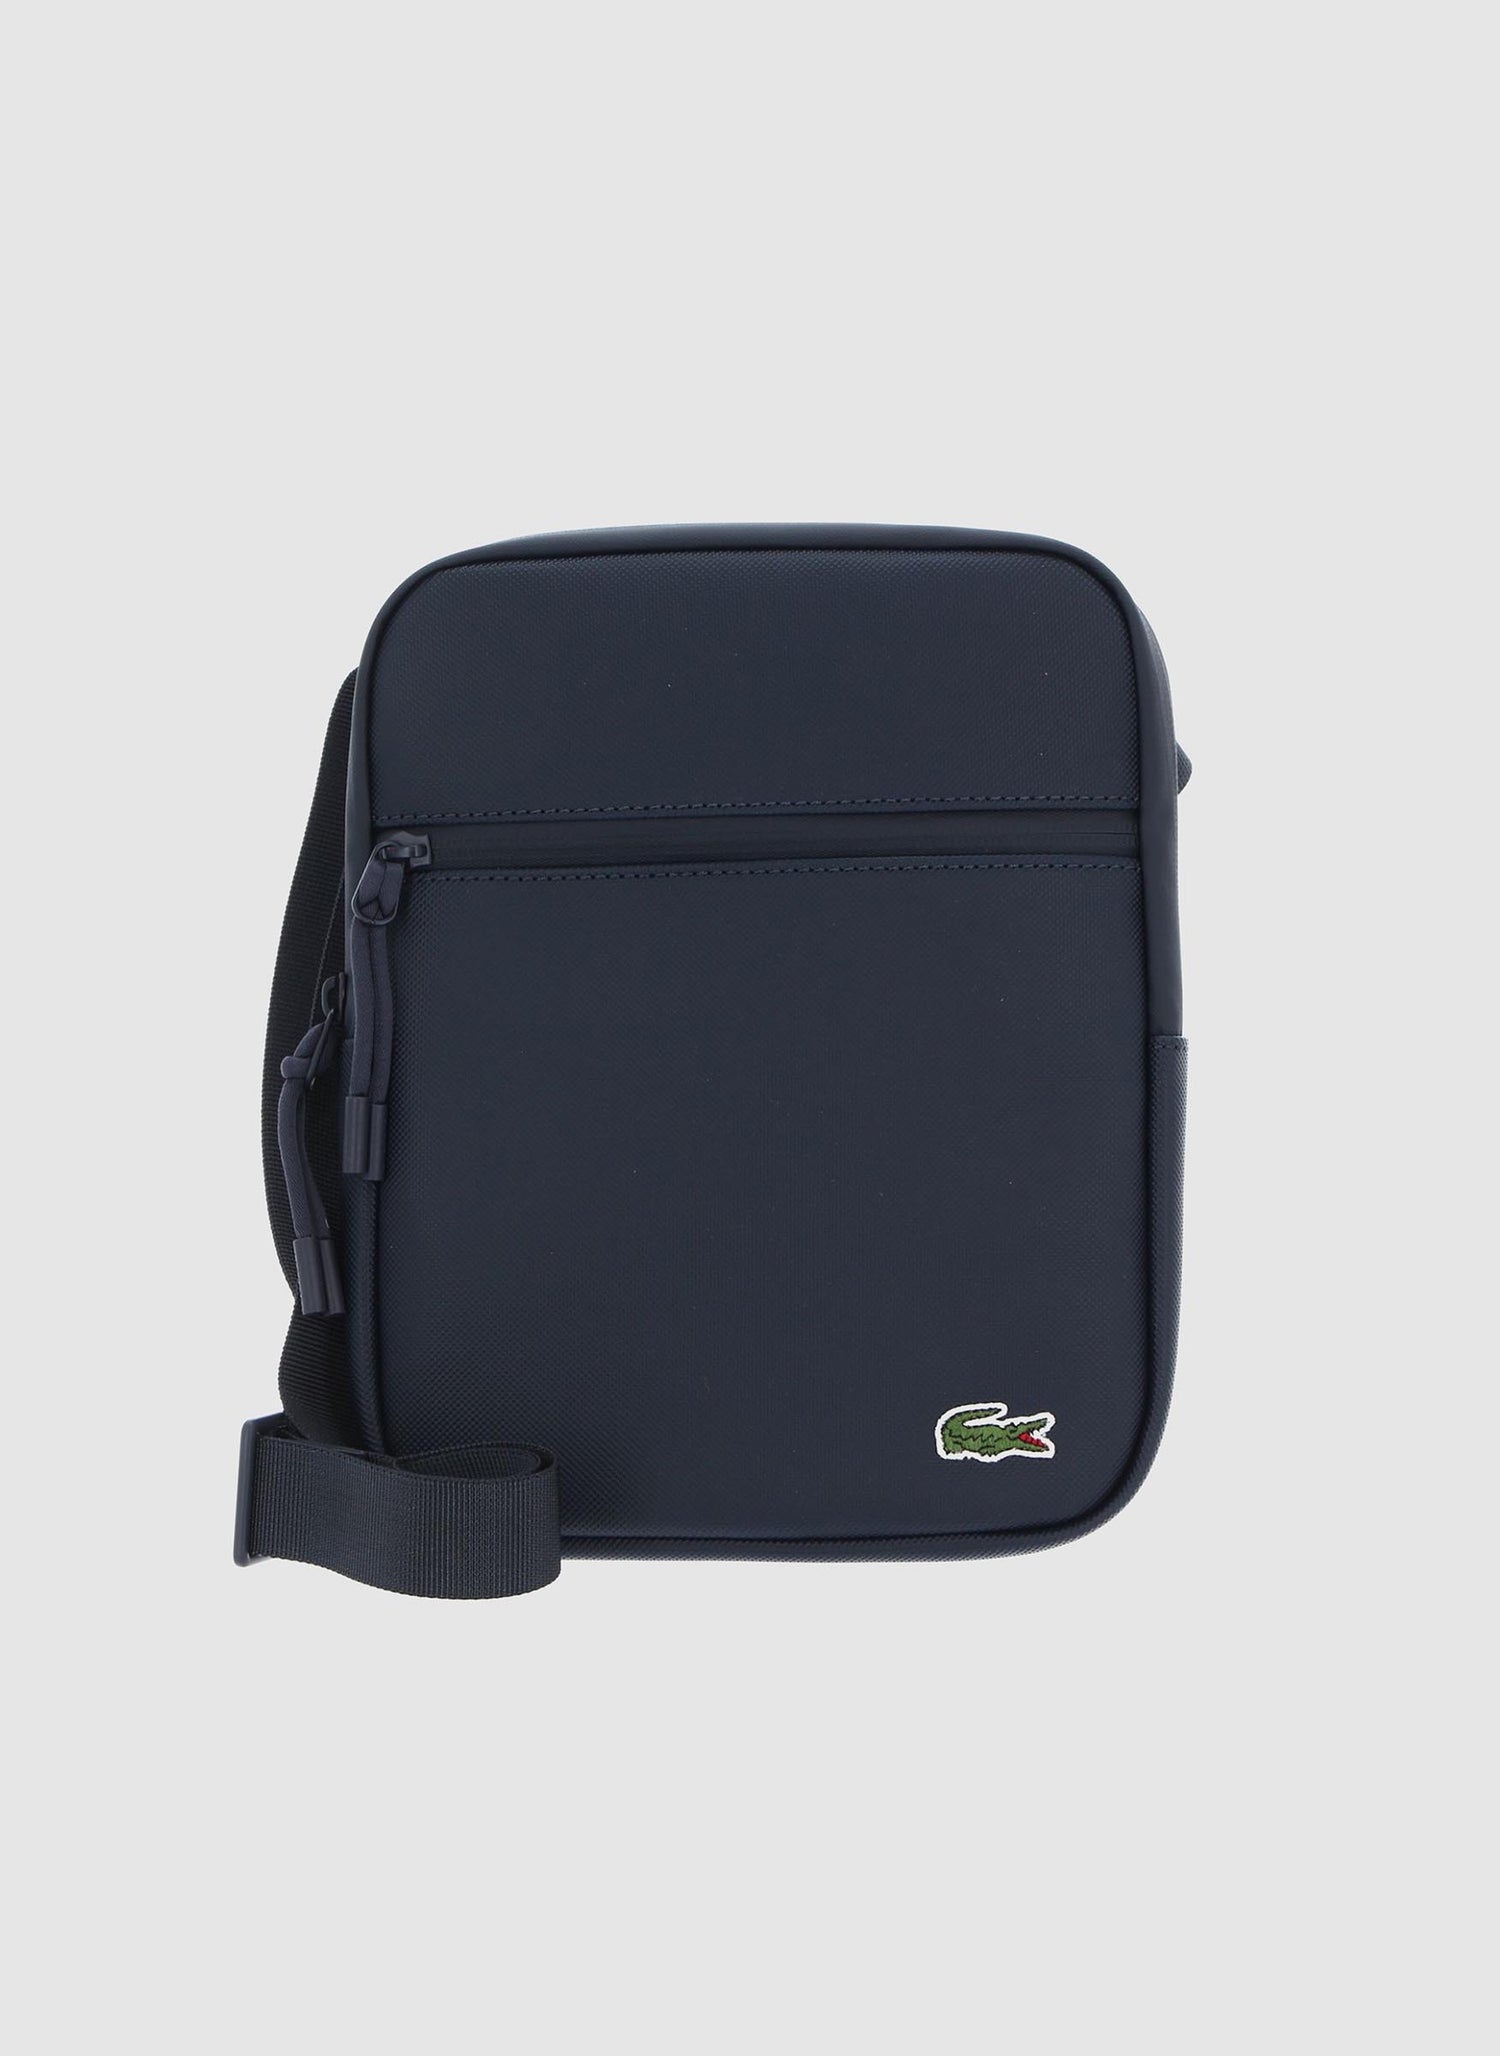 LCST Crossover Bag - Eclipse